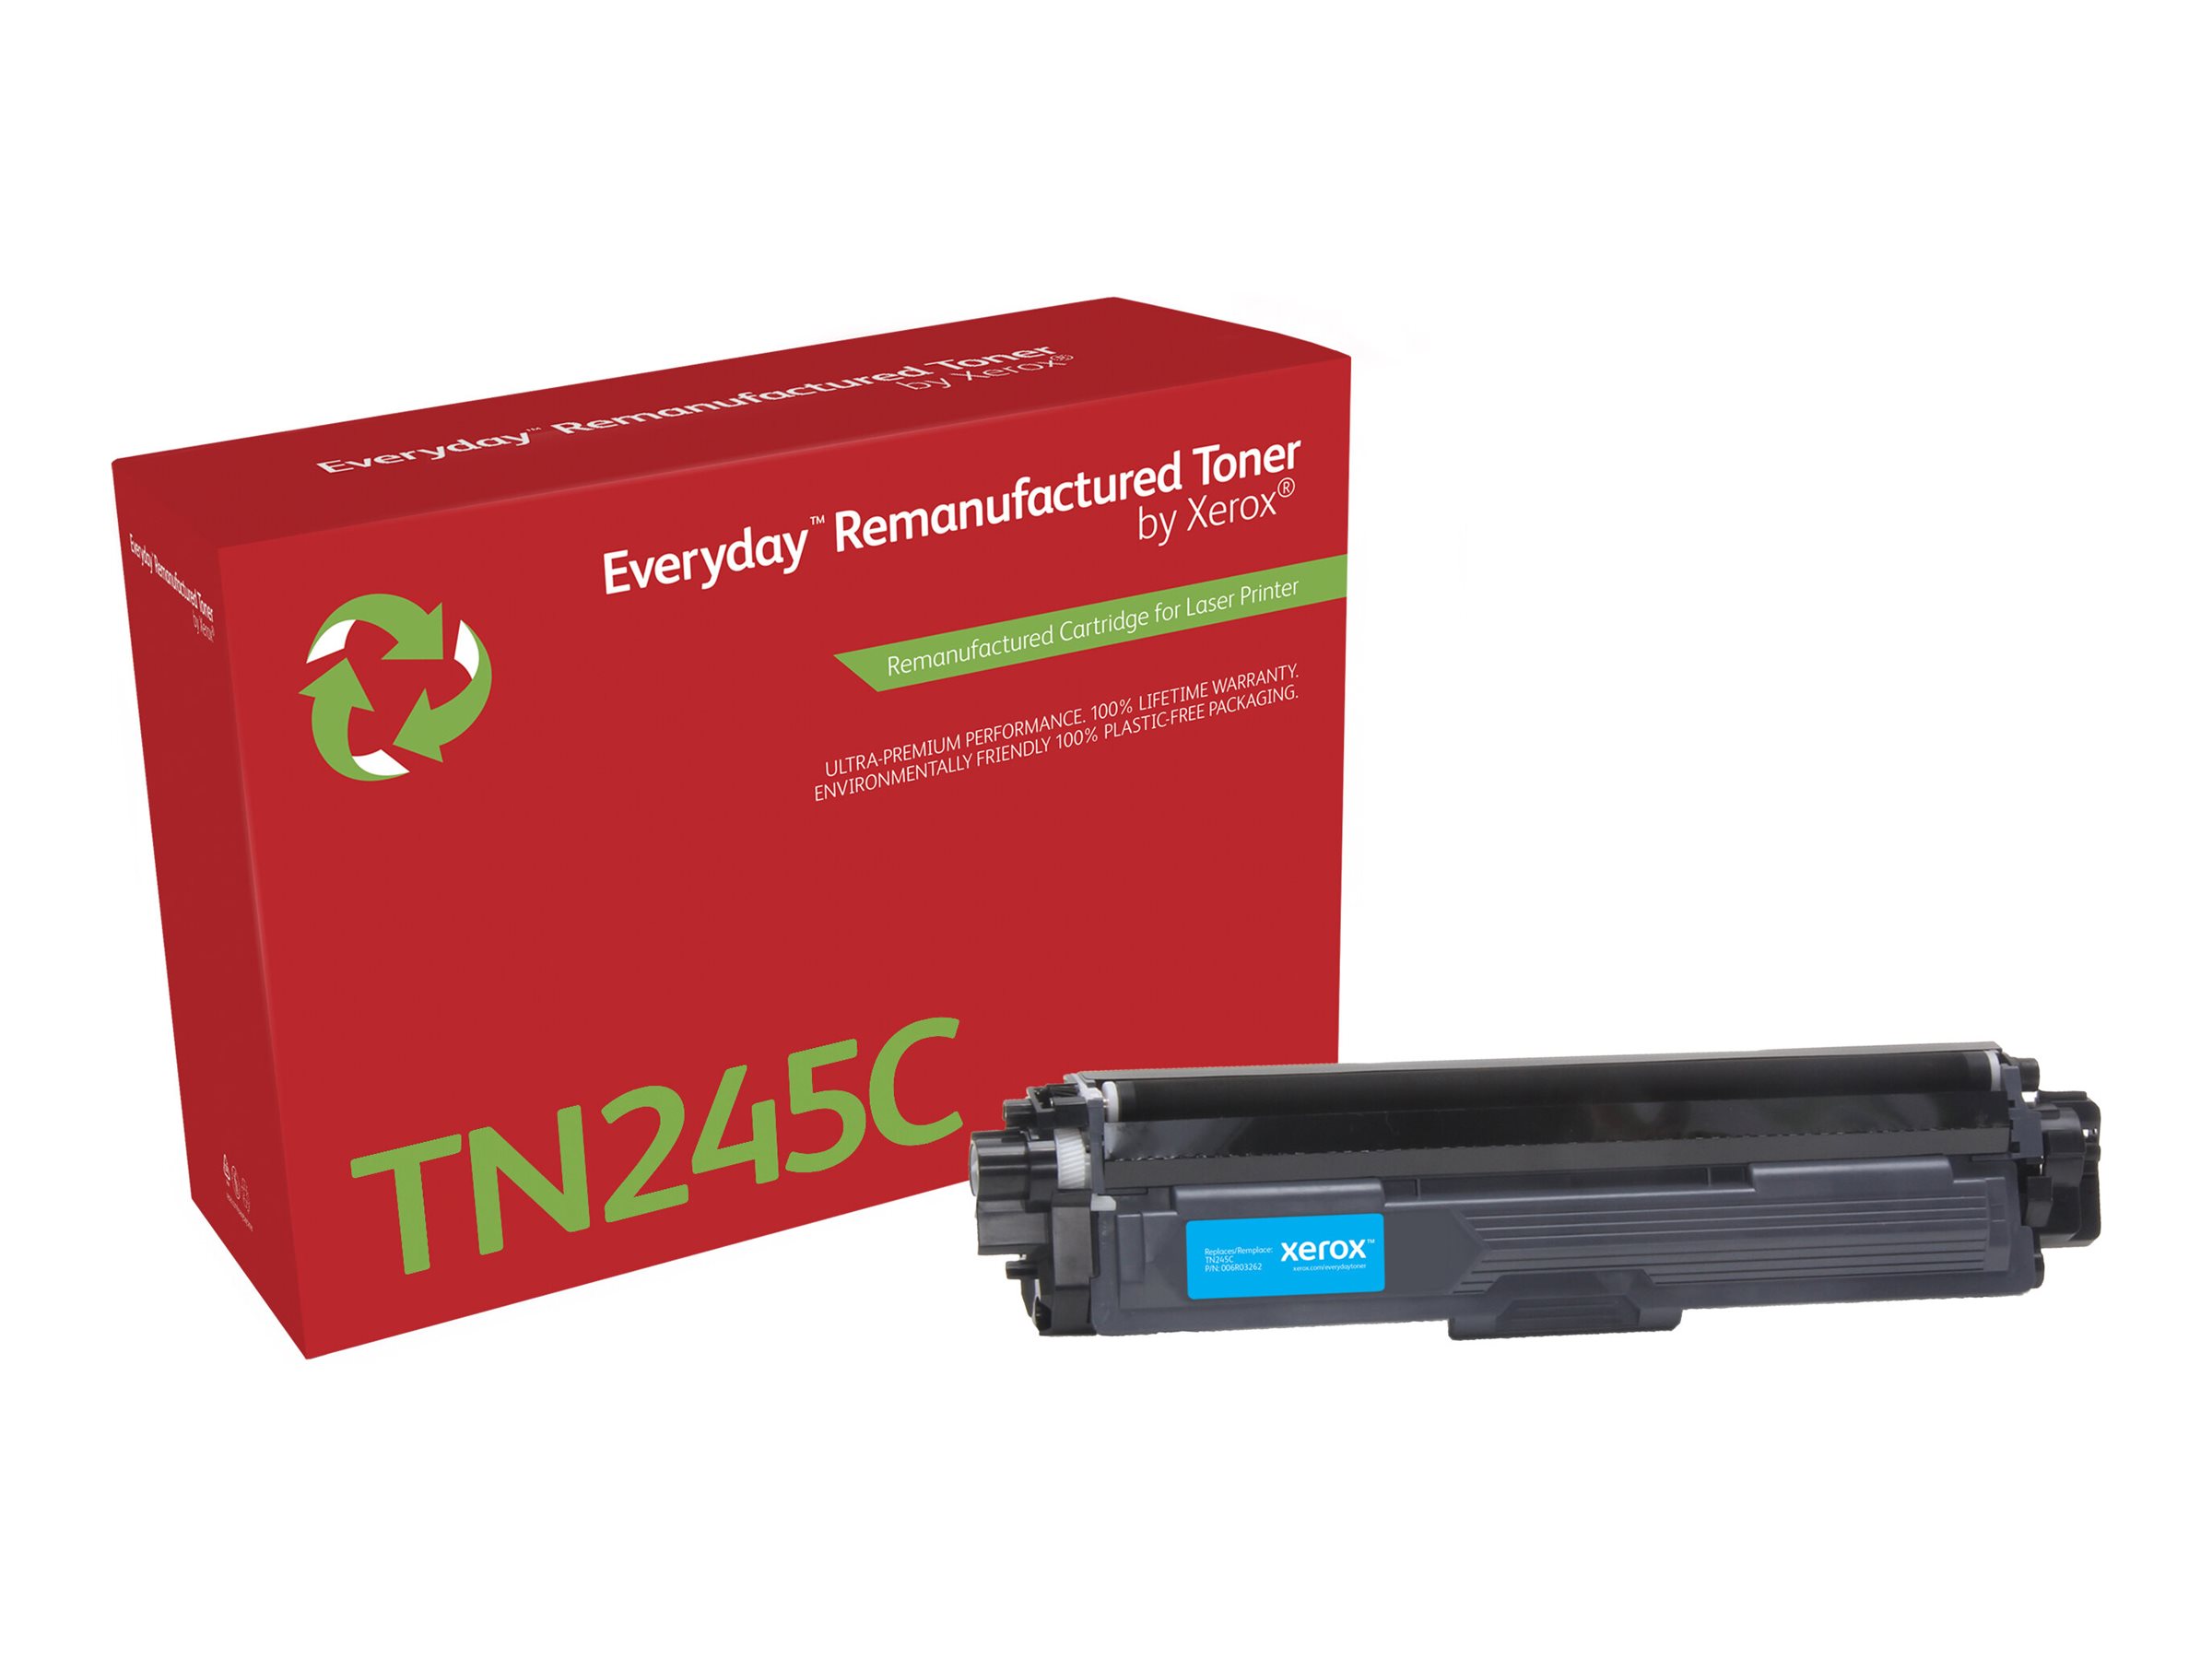 Low Cost Brother DCP-9020CDW Cyan Toner — The Cartridge Centre